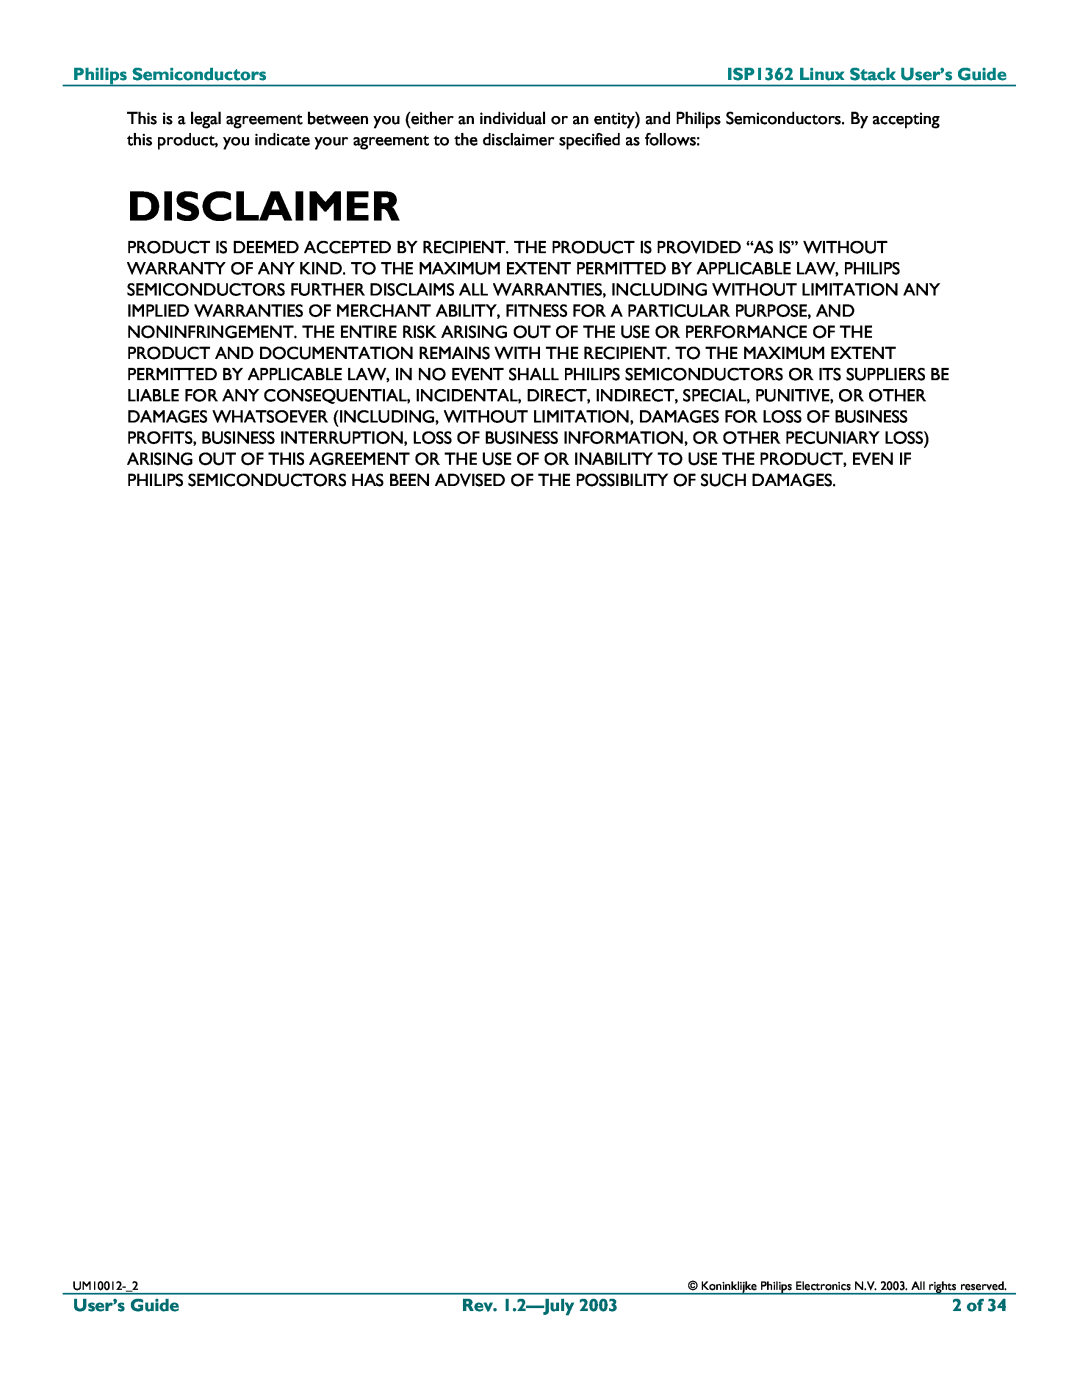 Philips manual Disclaimer, Philips Semiconductors, ISP1362 Linux Stack User’s Guide, Rev. 1.2—July2003, 2 of 